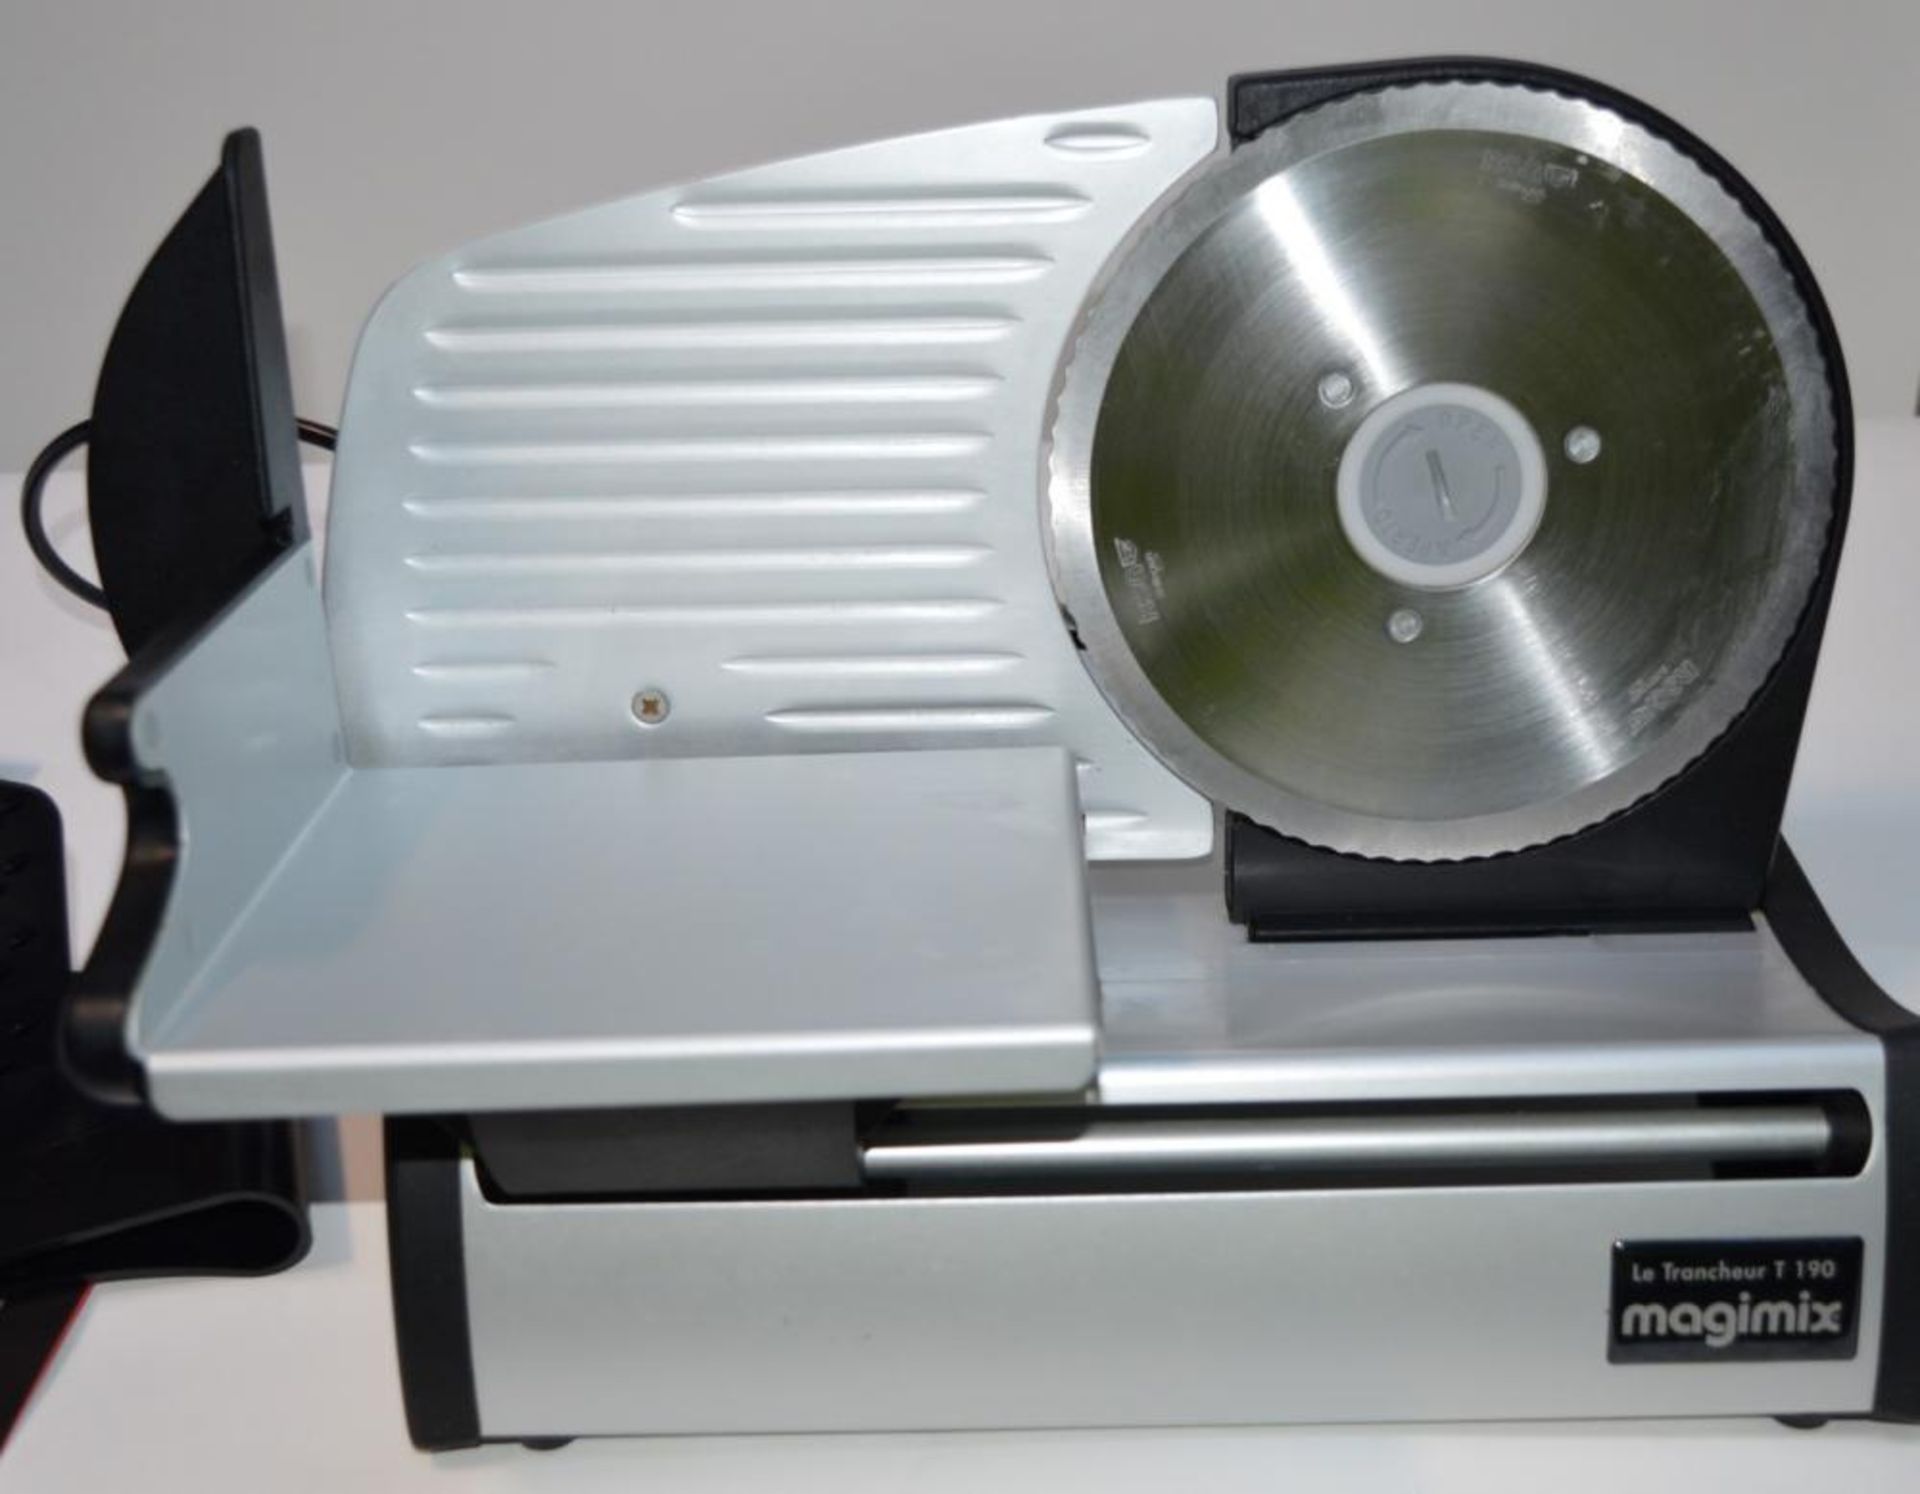 1 x Magimix 11650 T190 Stainless Steel Work Top Food Slicer - CL010 - Excellent Clean Condition - Id - Image 3 of 8